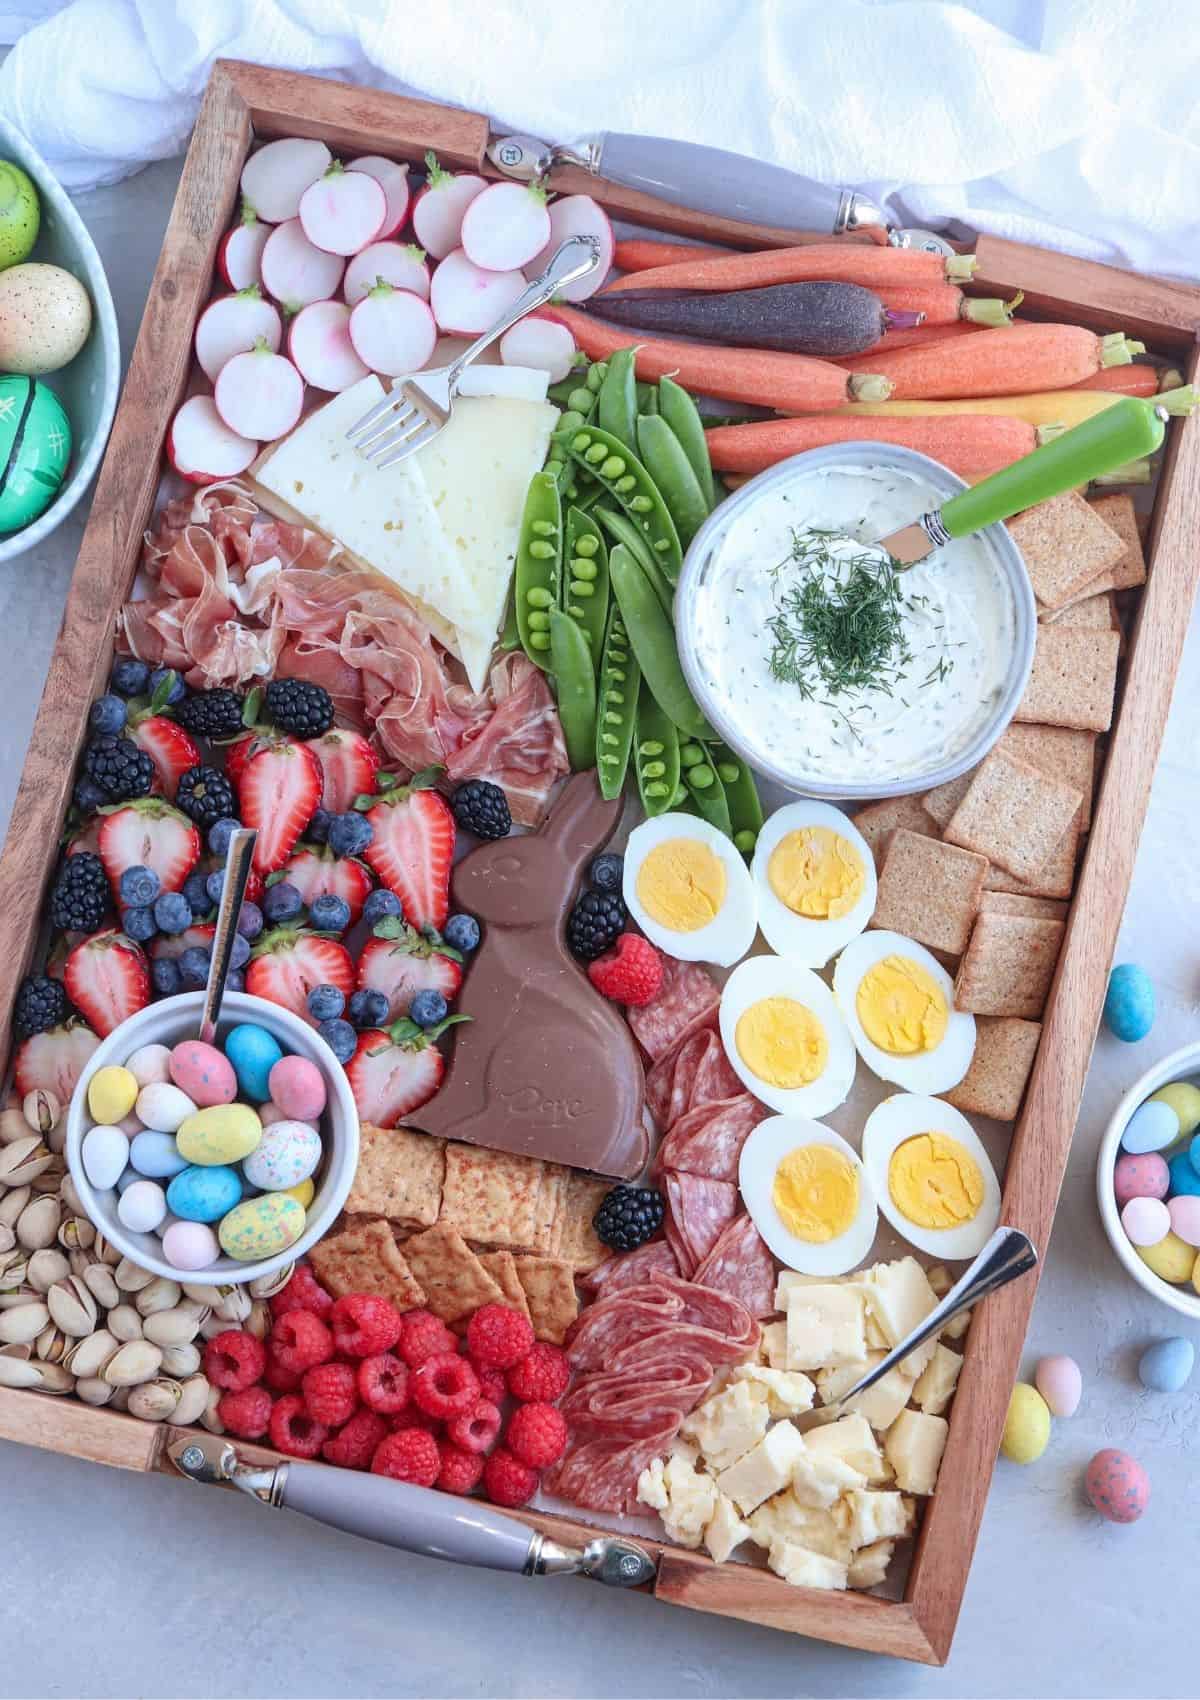 Easter grazing platter with crackers, fruits, veggies, dip, chocolate, and deviled eggs